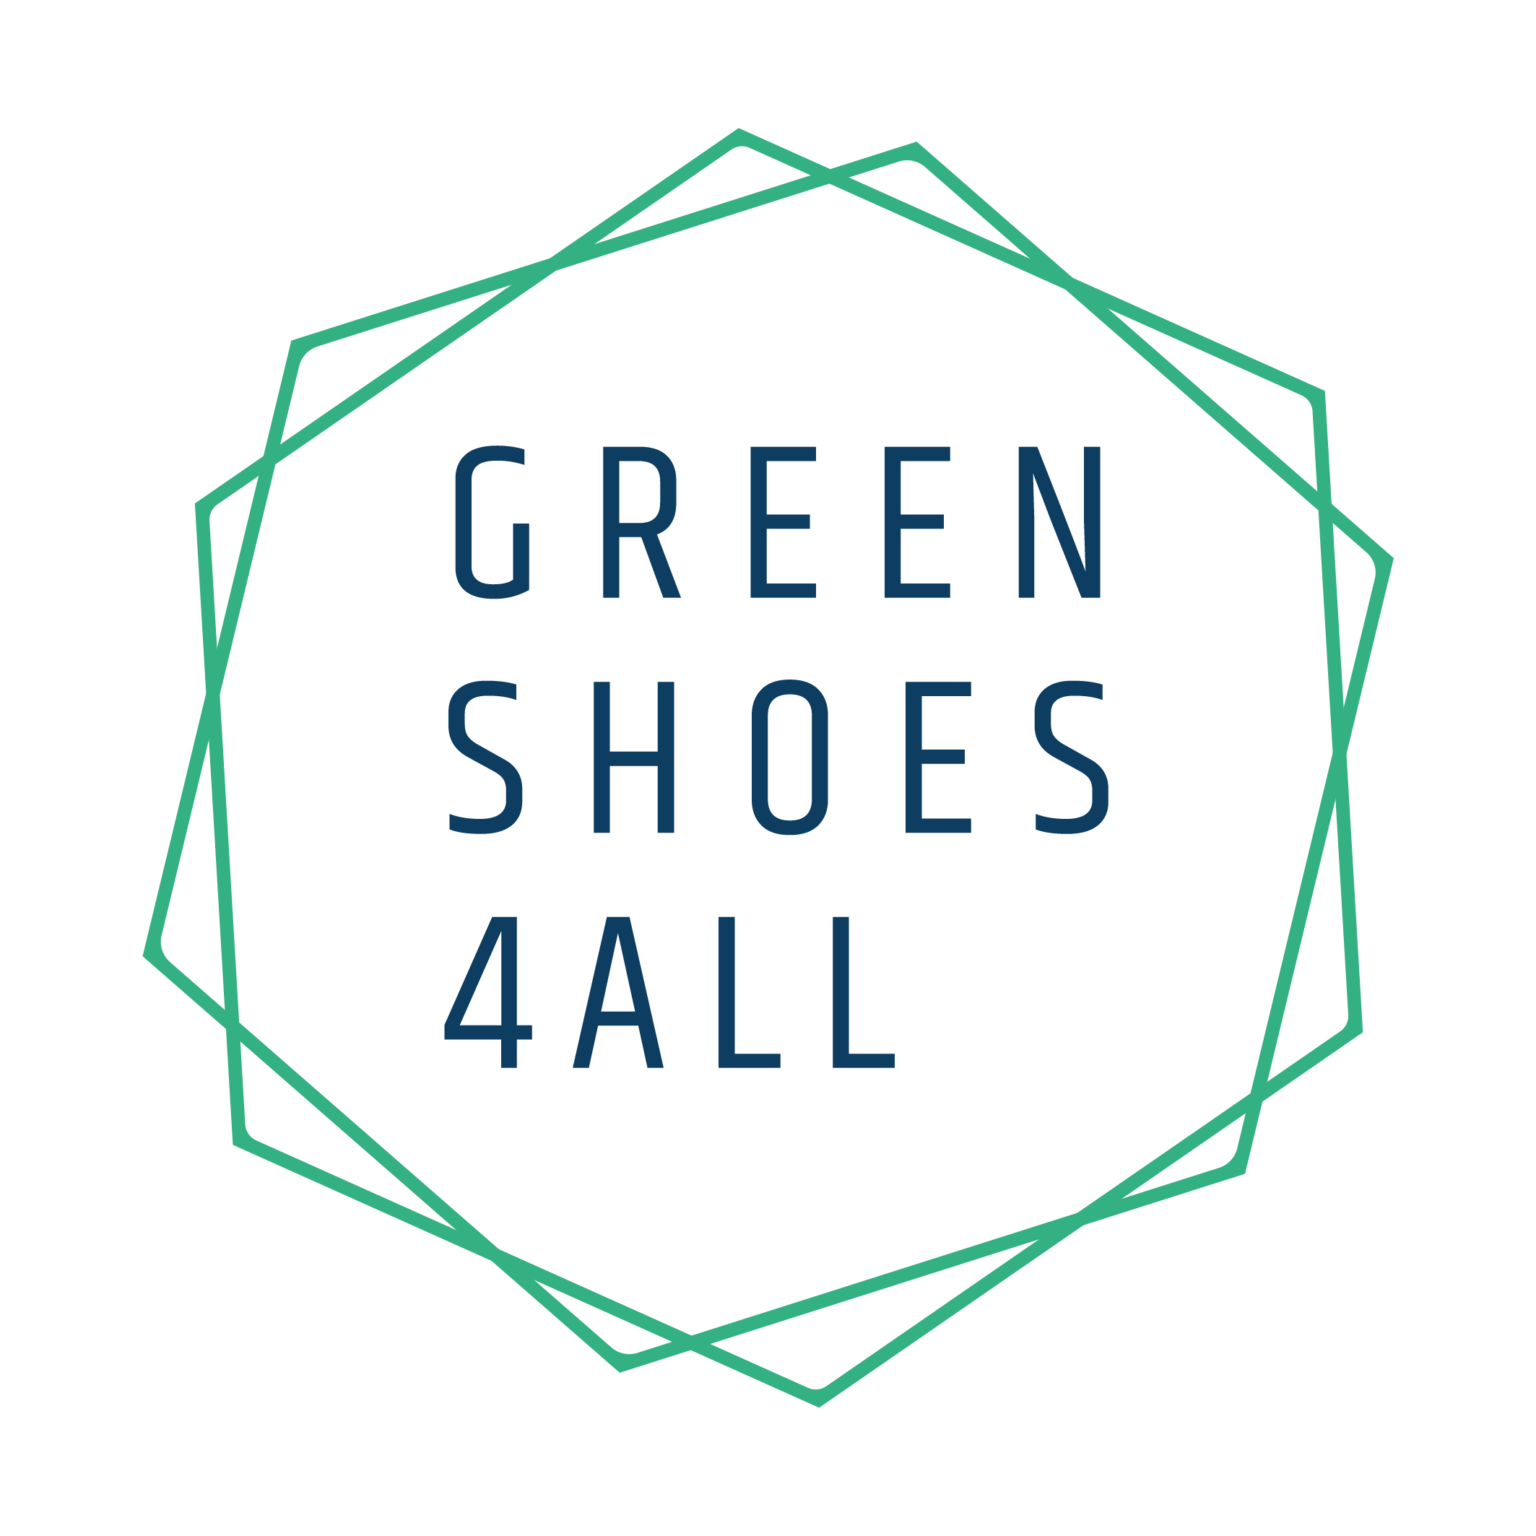 Greenshoes4all